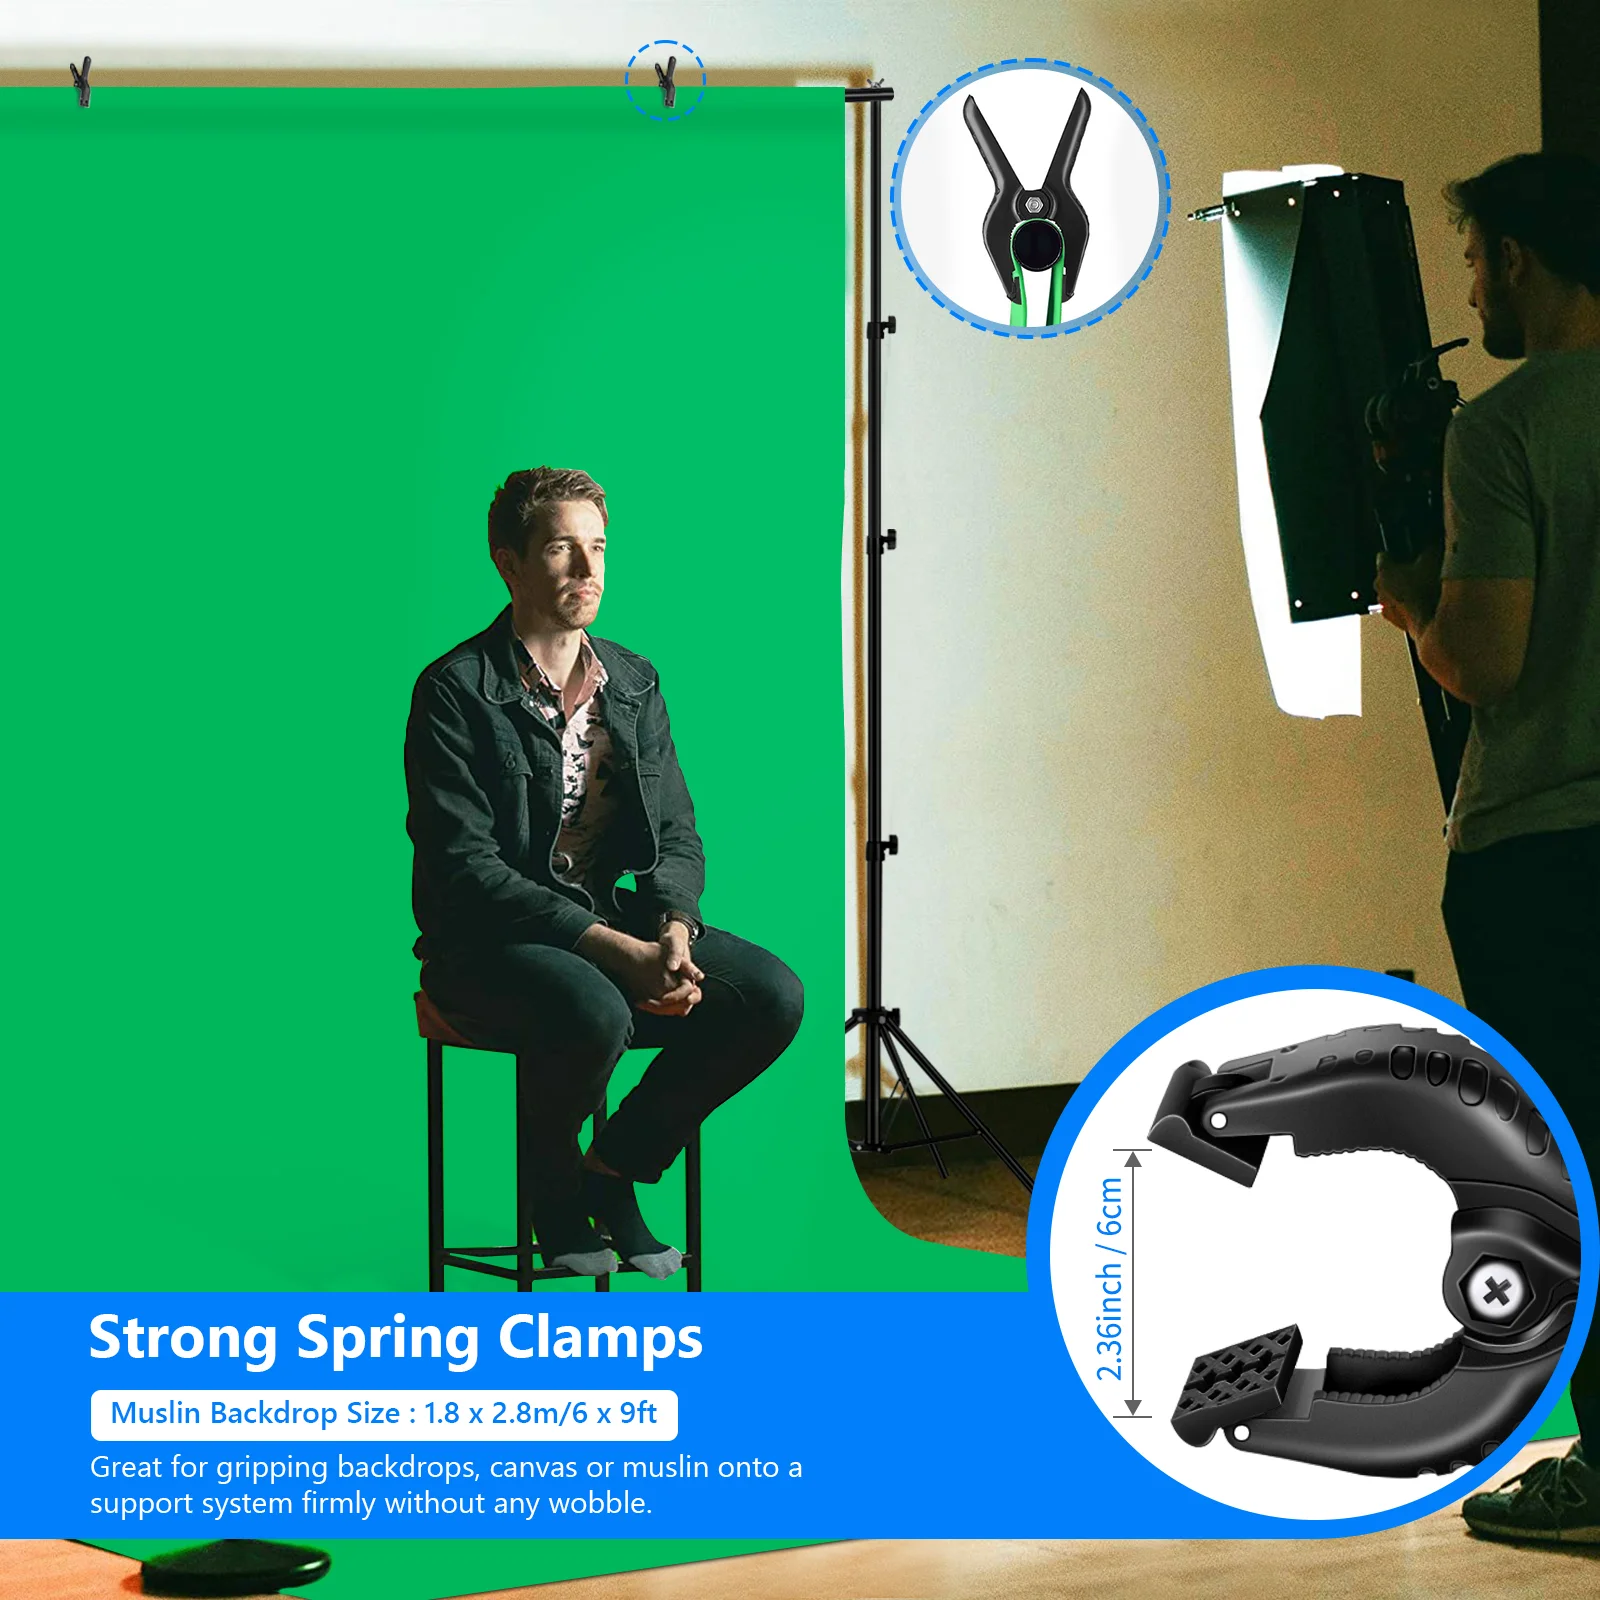 Neewer Backdrop 400W 5500K Continuous Umbrella Studio Lighting Muslin Chromakey Green Screen and Backdrop Stand Support System